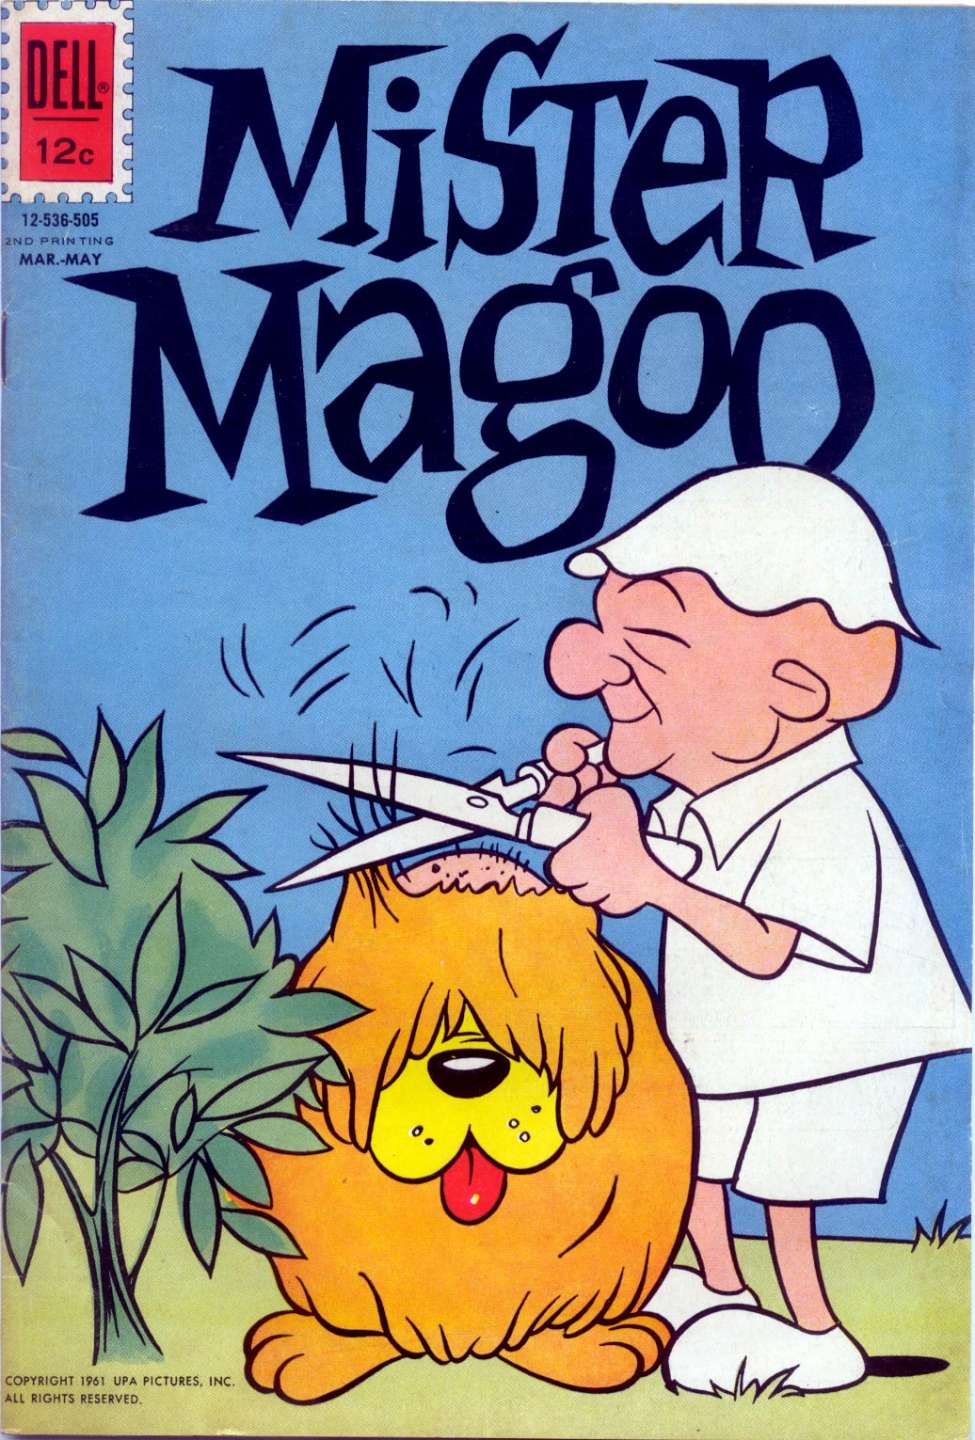 Book Cover For 1235 - The Nearsighted Mr. Magoo